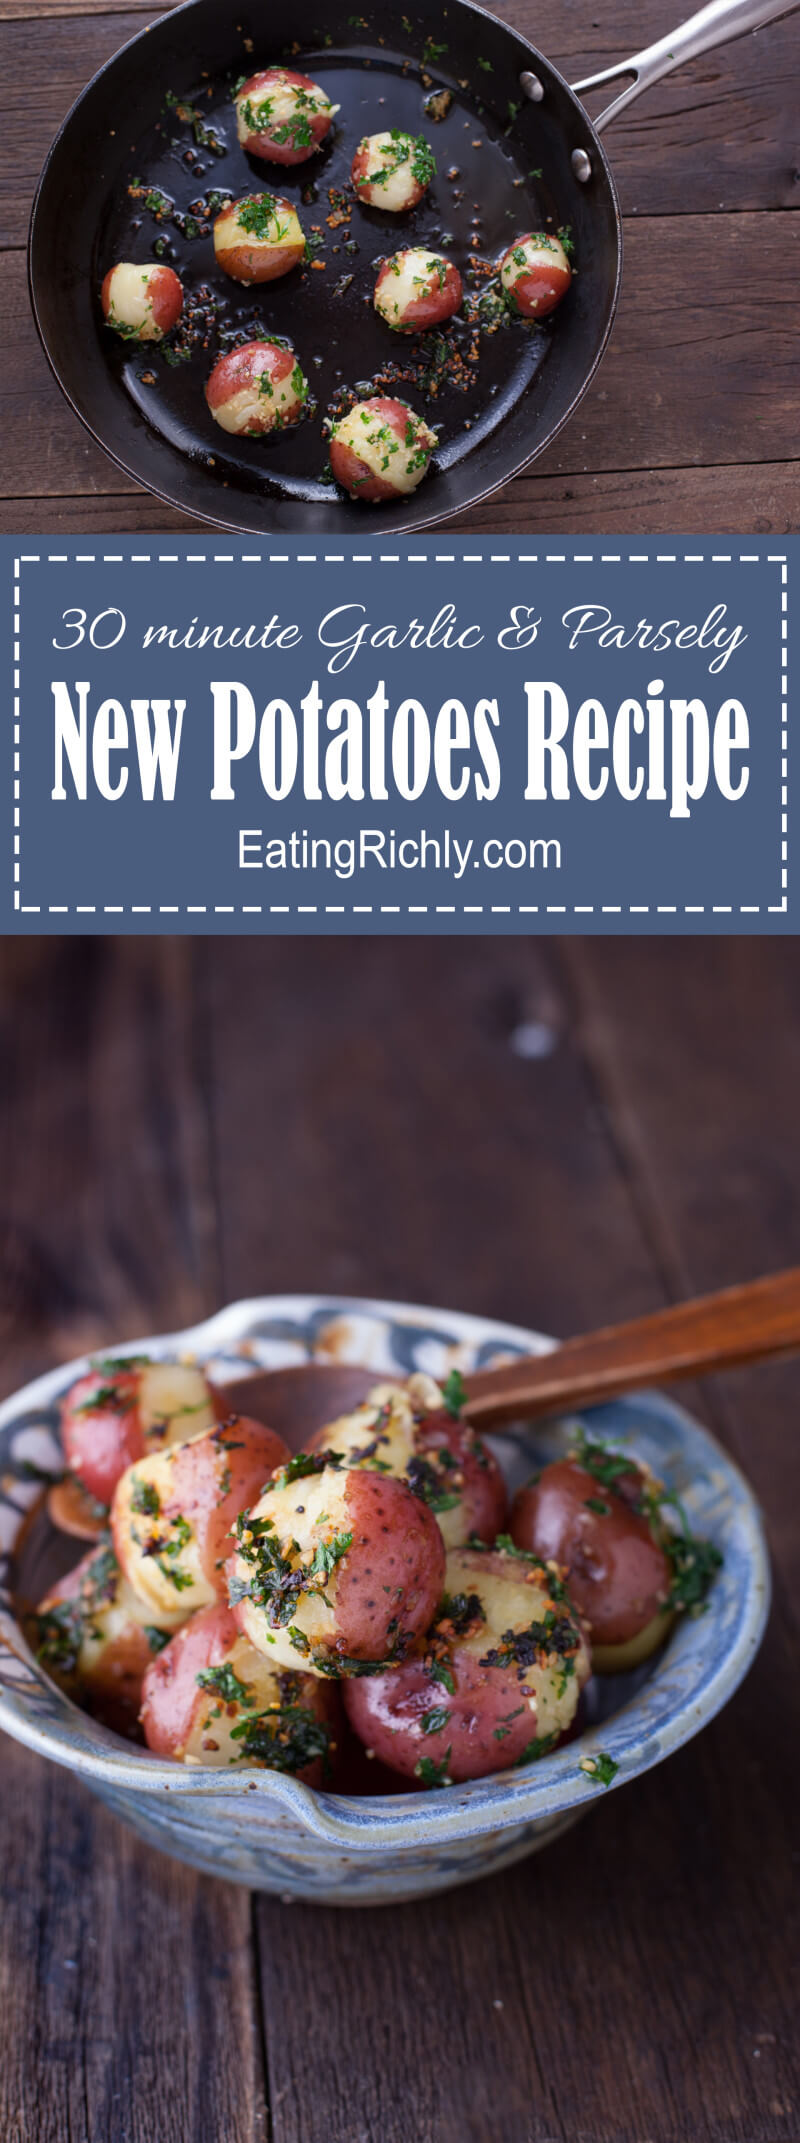 This easy new potatoes recipe is flavored with fresh garlic and parsley and ready in just 30 minutes. From EatingRichly.com